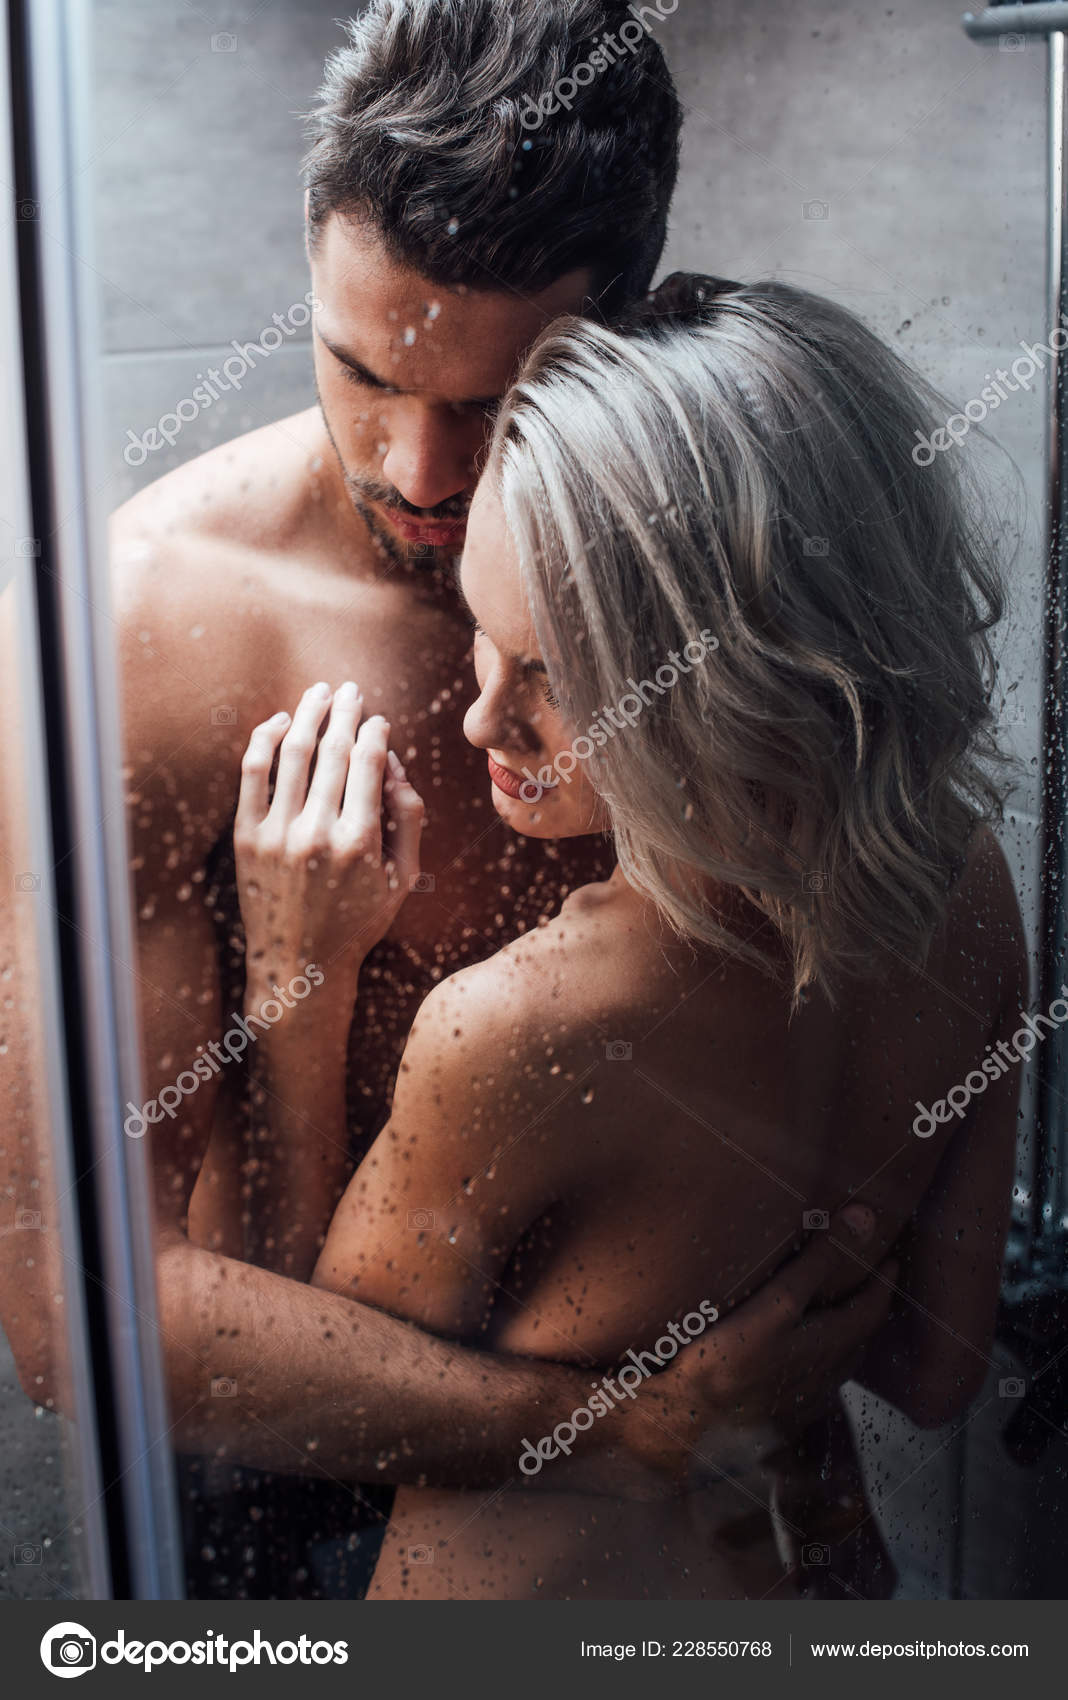 Naked Couple In Shower smoking crack